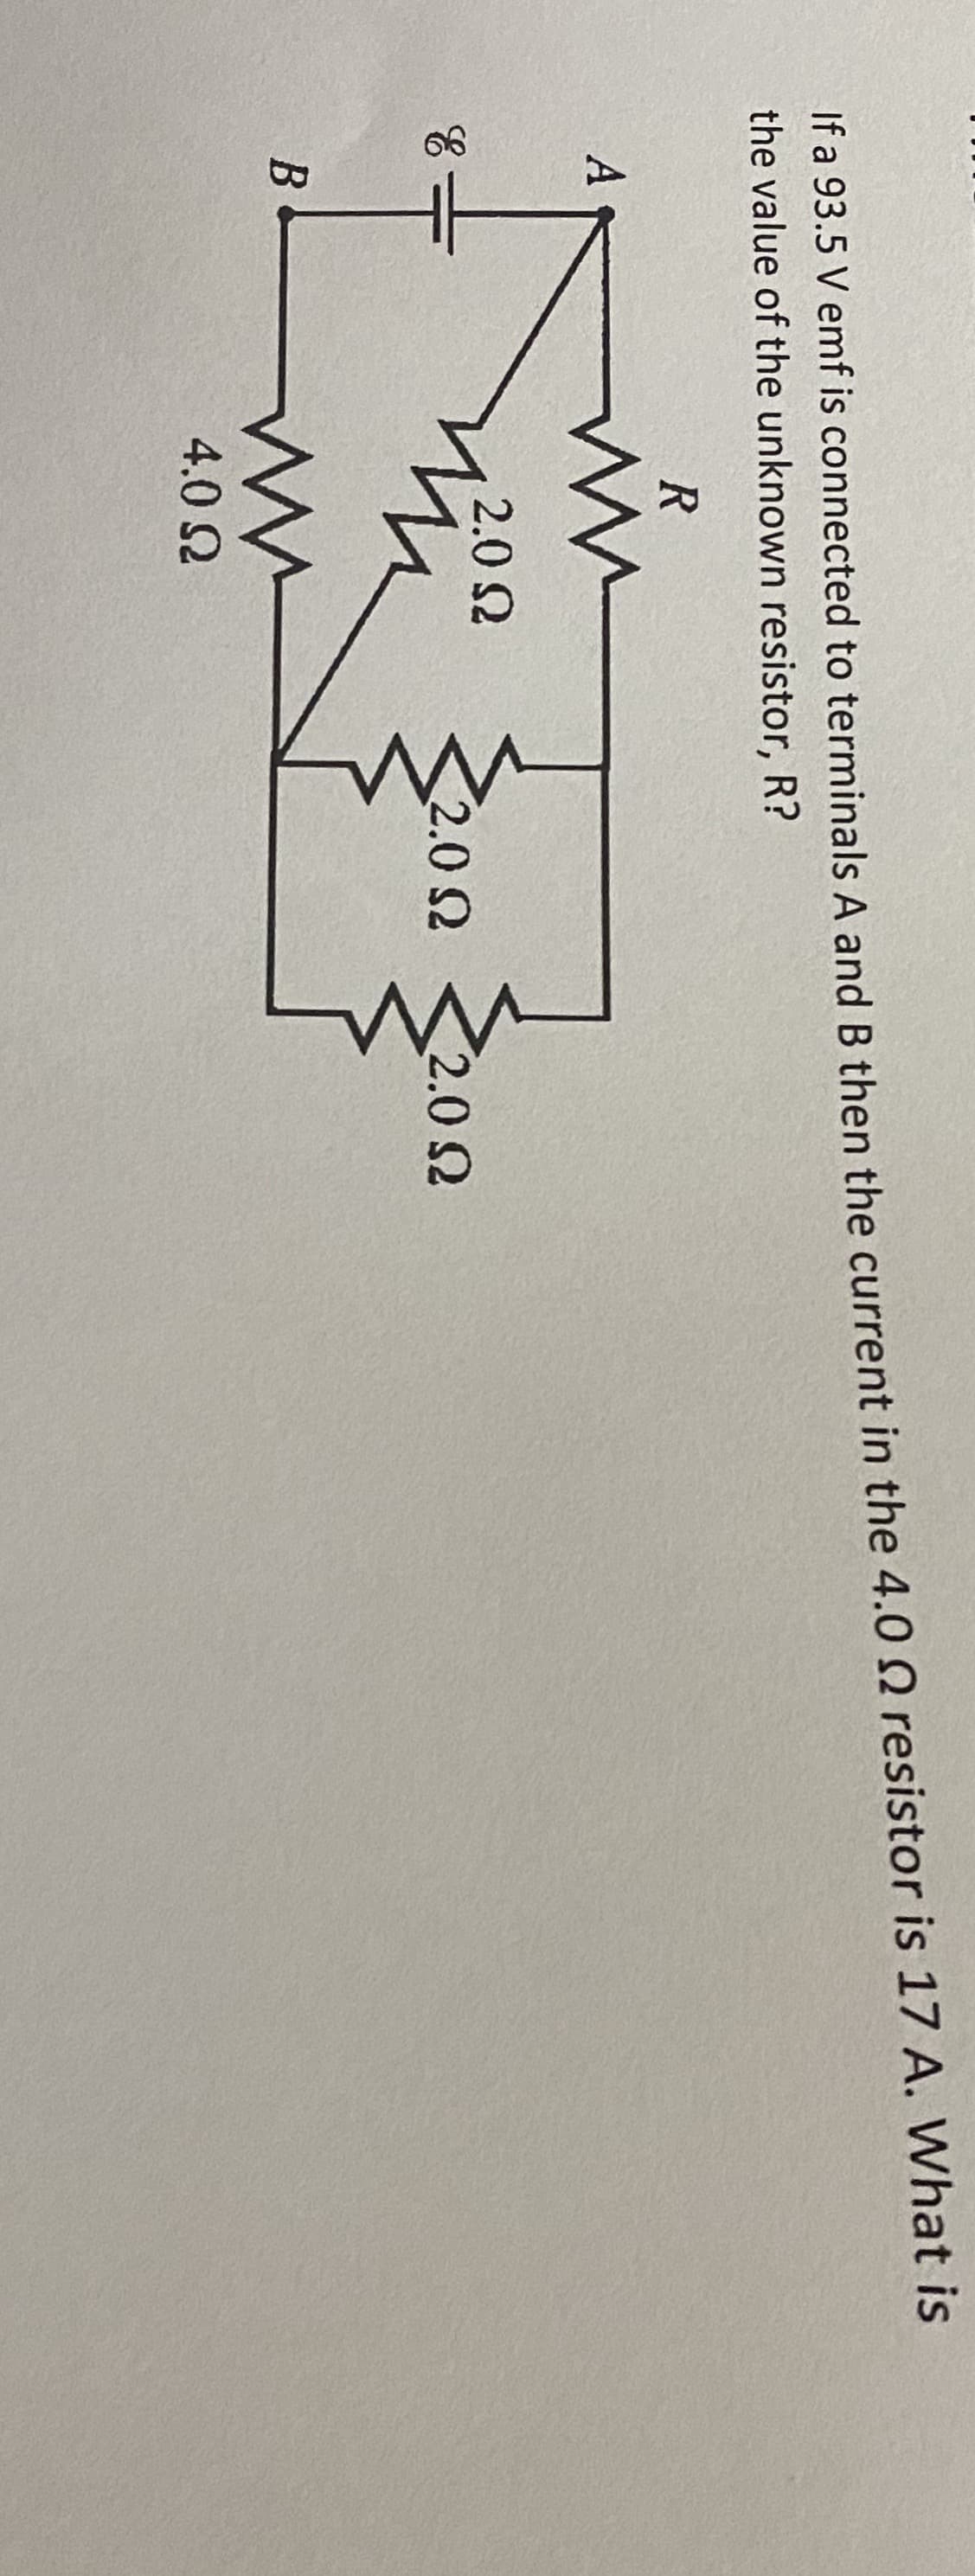 If a 93.5 V emf is connected to terminals A and B then the current in the 4.0 0 resistor is 17 A. What is
the value of the unknown resistor, R?
R
A
2.0 2
2.0 2
2.0 2
4.0 2
